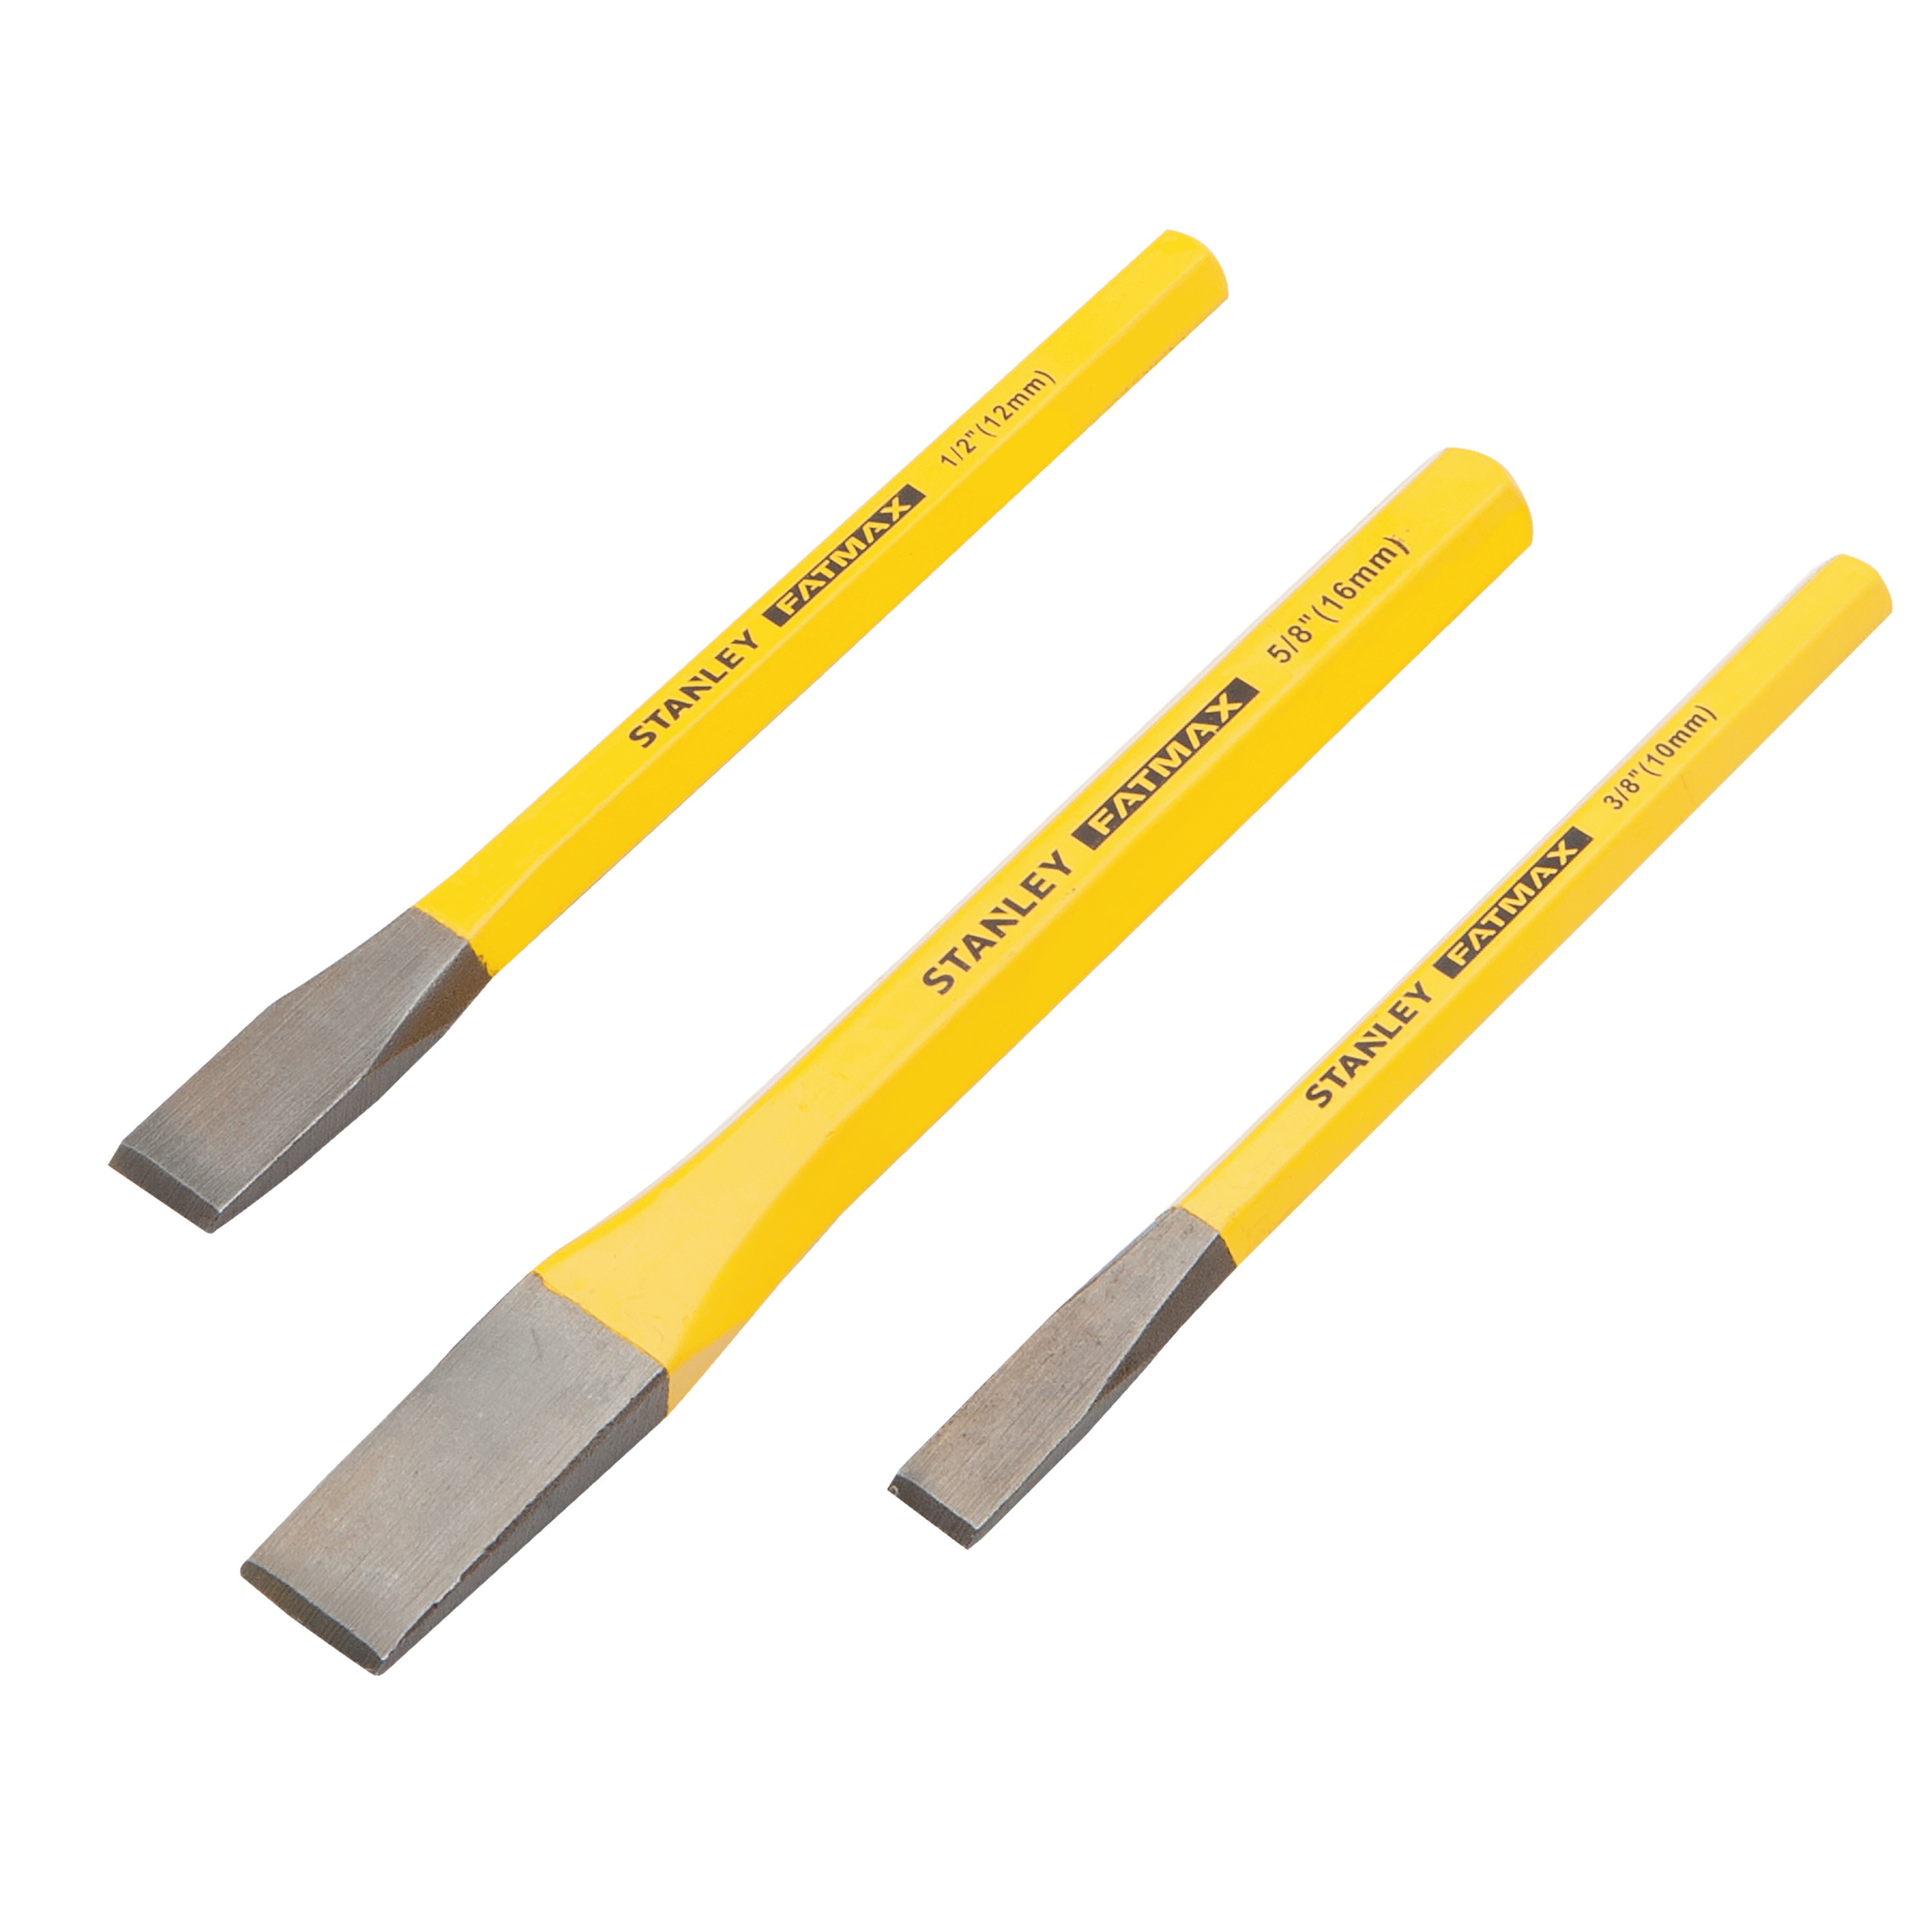 Stanley Tools - 3 pc FATMAX Cold Chisel Set - FMHT16553